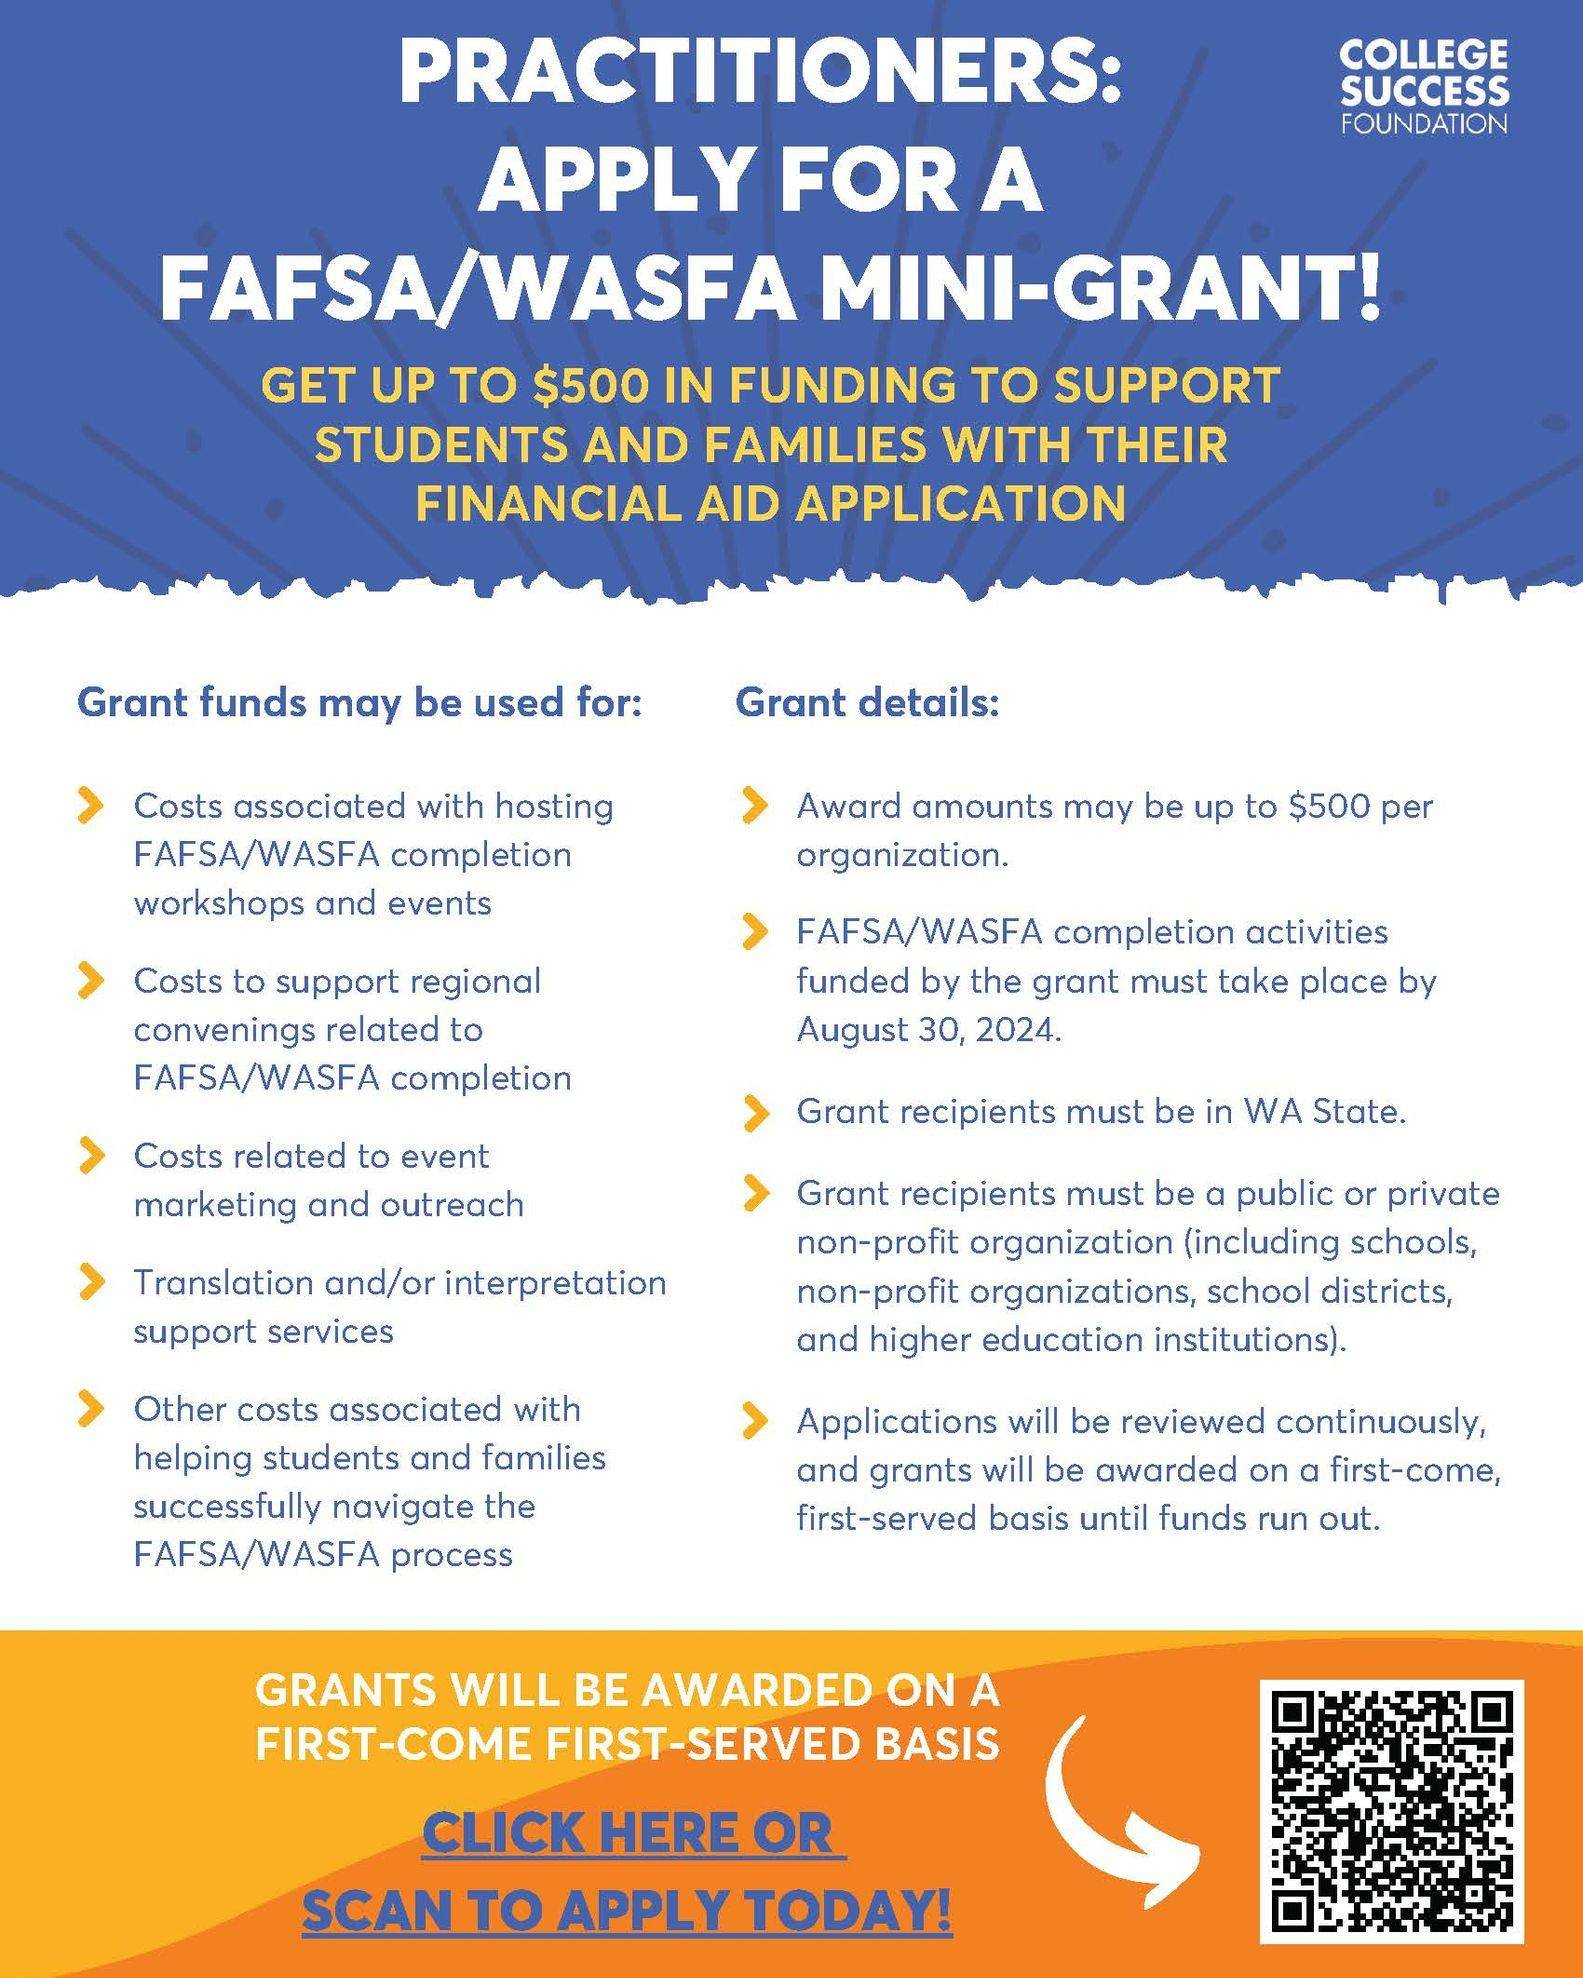 📍 College Success Foundation (CSF) is offering mini-grants to schools and organizations to support their upcoming FAFSA/WASFA completion activities. 

👉Difficulties with the Better FAFSA rollout have led to challenges for students and families both